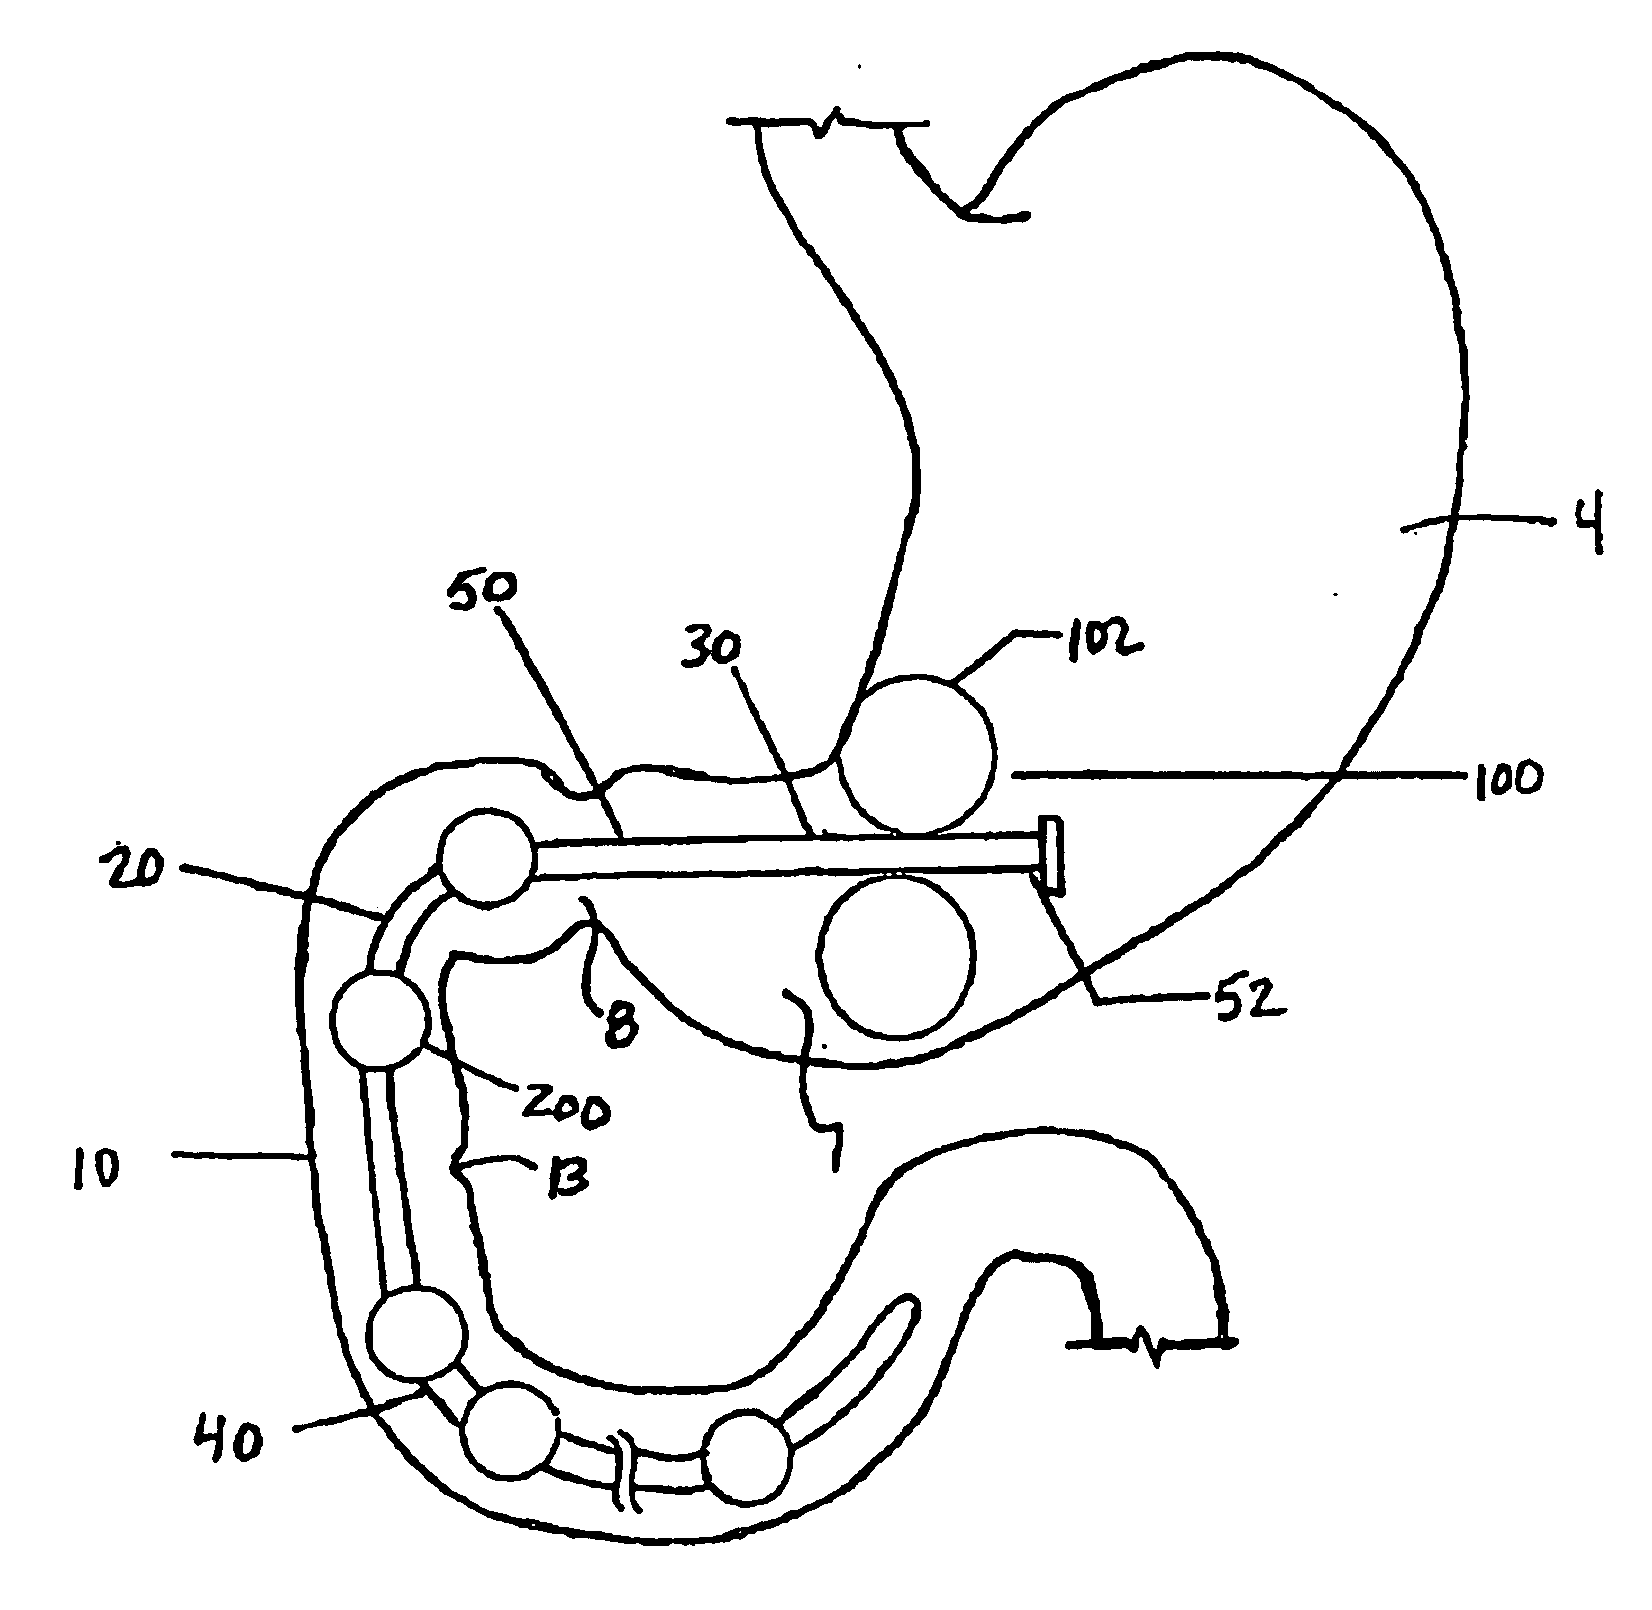 Methods and devices to curb appetite and/or to reduce food intake